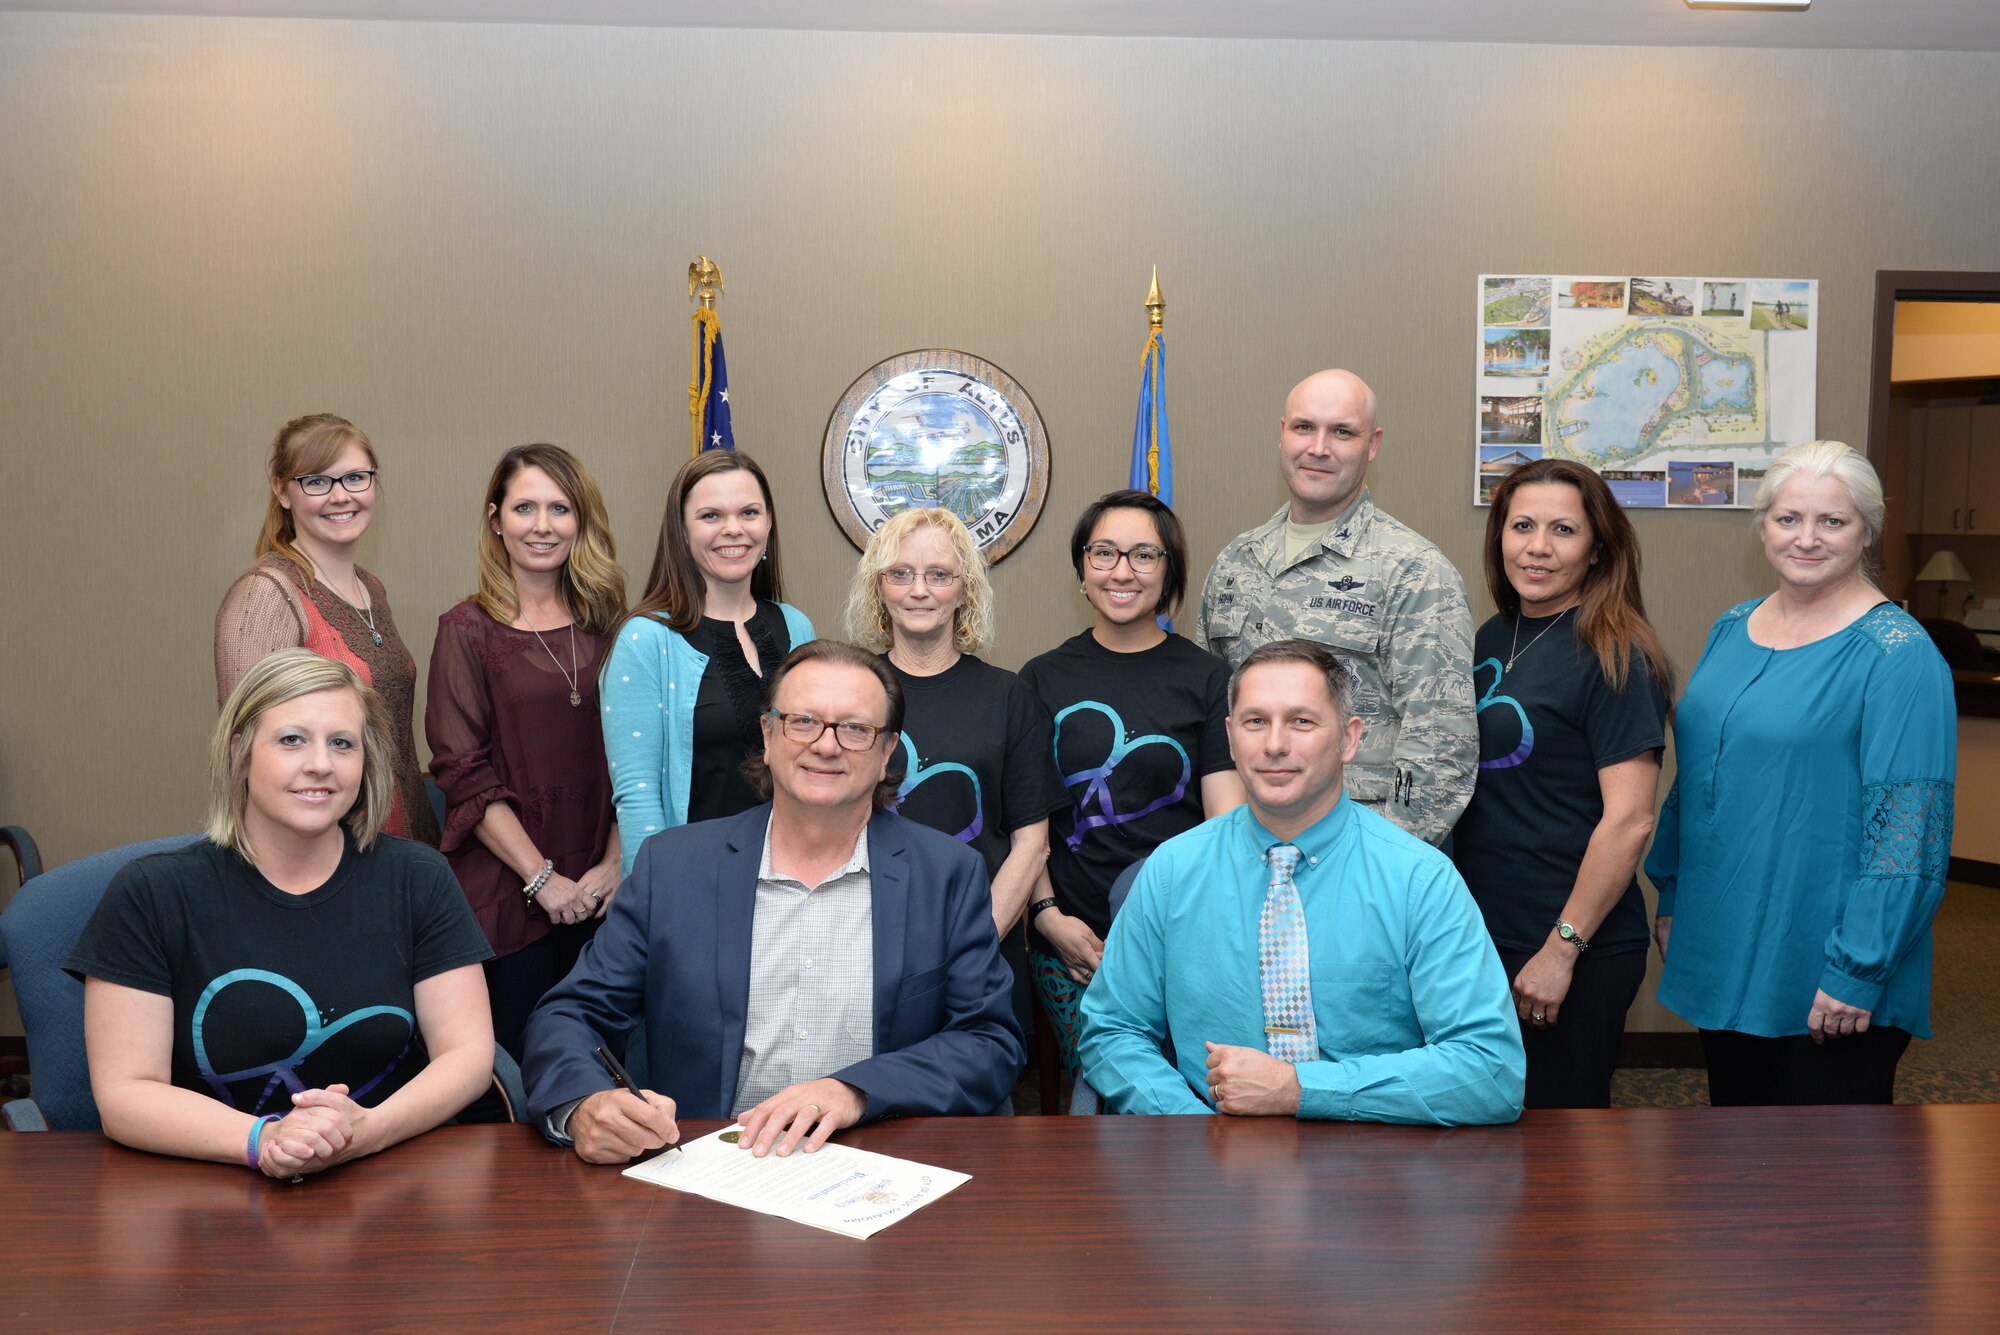 Jack Smiley, mayor of the City of Altus, Matt O'Dell, 97th Wing Staff Agencies sexual assault response coordinator, and U.S. Air Force Col. Todd Hohn, 97th Air Mobility Wing commander, pose with Altus community members, March 21, 2017, Altus, Oklahoma. The City of Altus and Altus Air Force Base came together to sign a proclamation, reaffirming the support to sexual assault victims as part of Sexual Assault Awareness and Prevention Month.